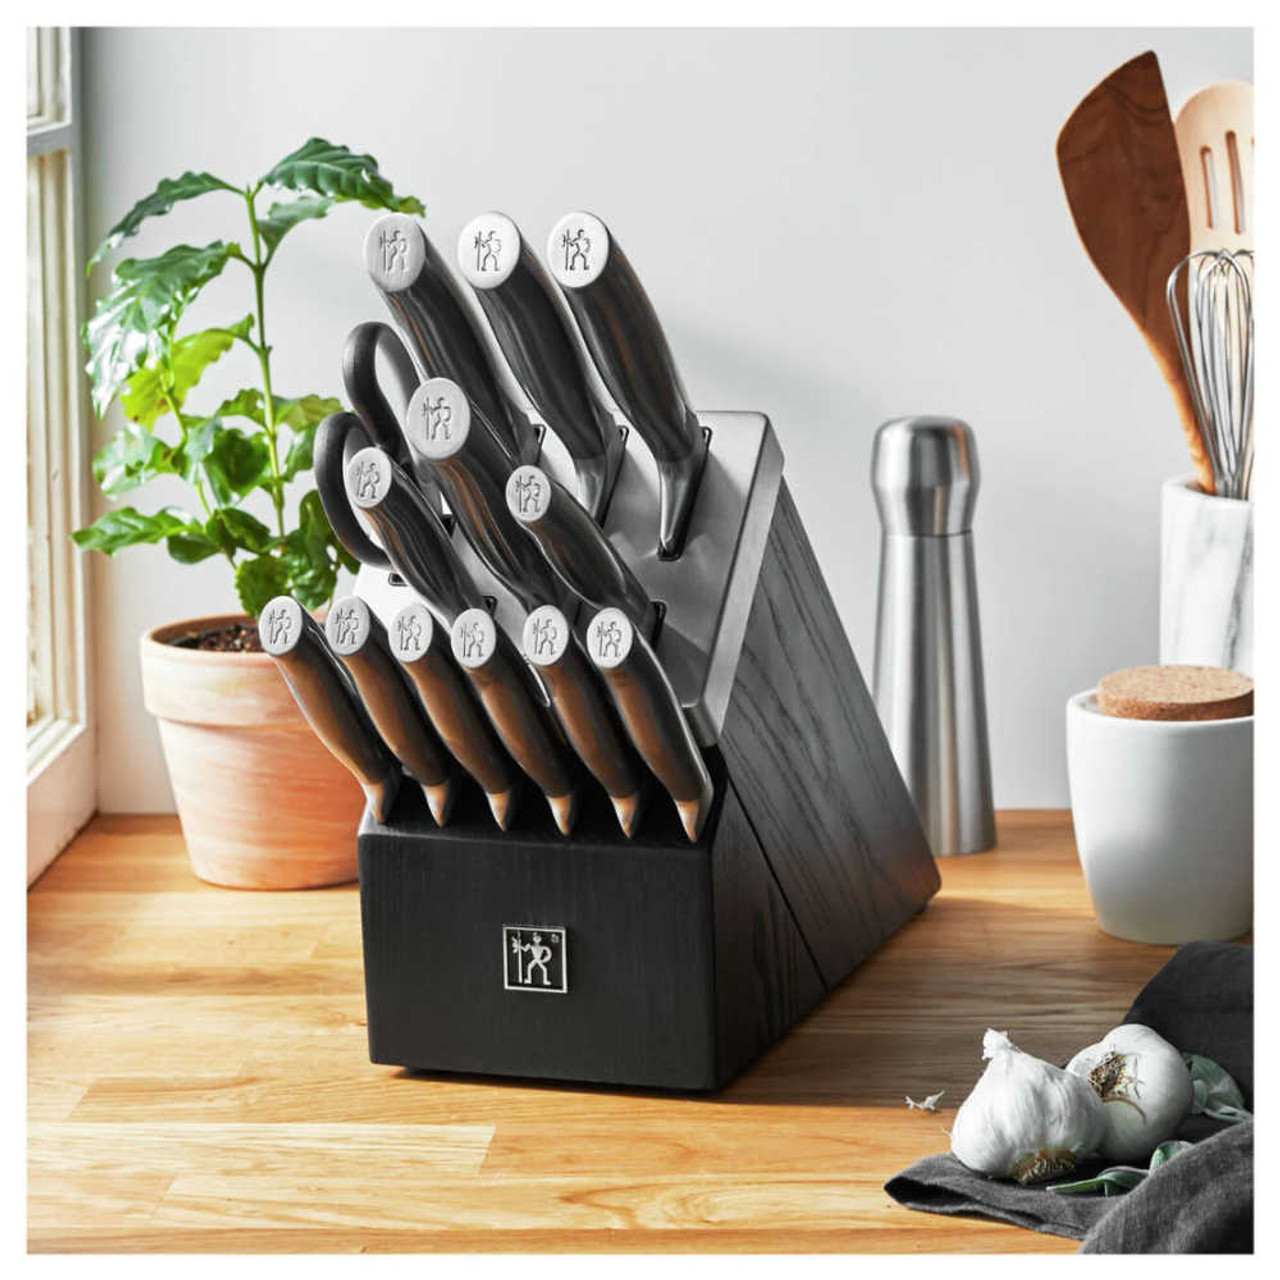 https://cdn11.bigcommerce.com/s-hccytny0od/images/stencil/1280x1280/products/5183/22379/Henckels_Graphite_14-Piece_Self-Sharpening_Knife_Block_Set_2__07400.1669148794.jpg?c=2?imbypass=on